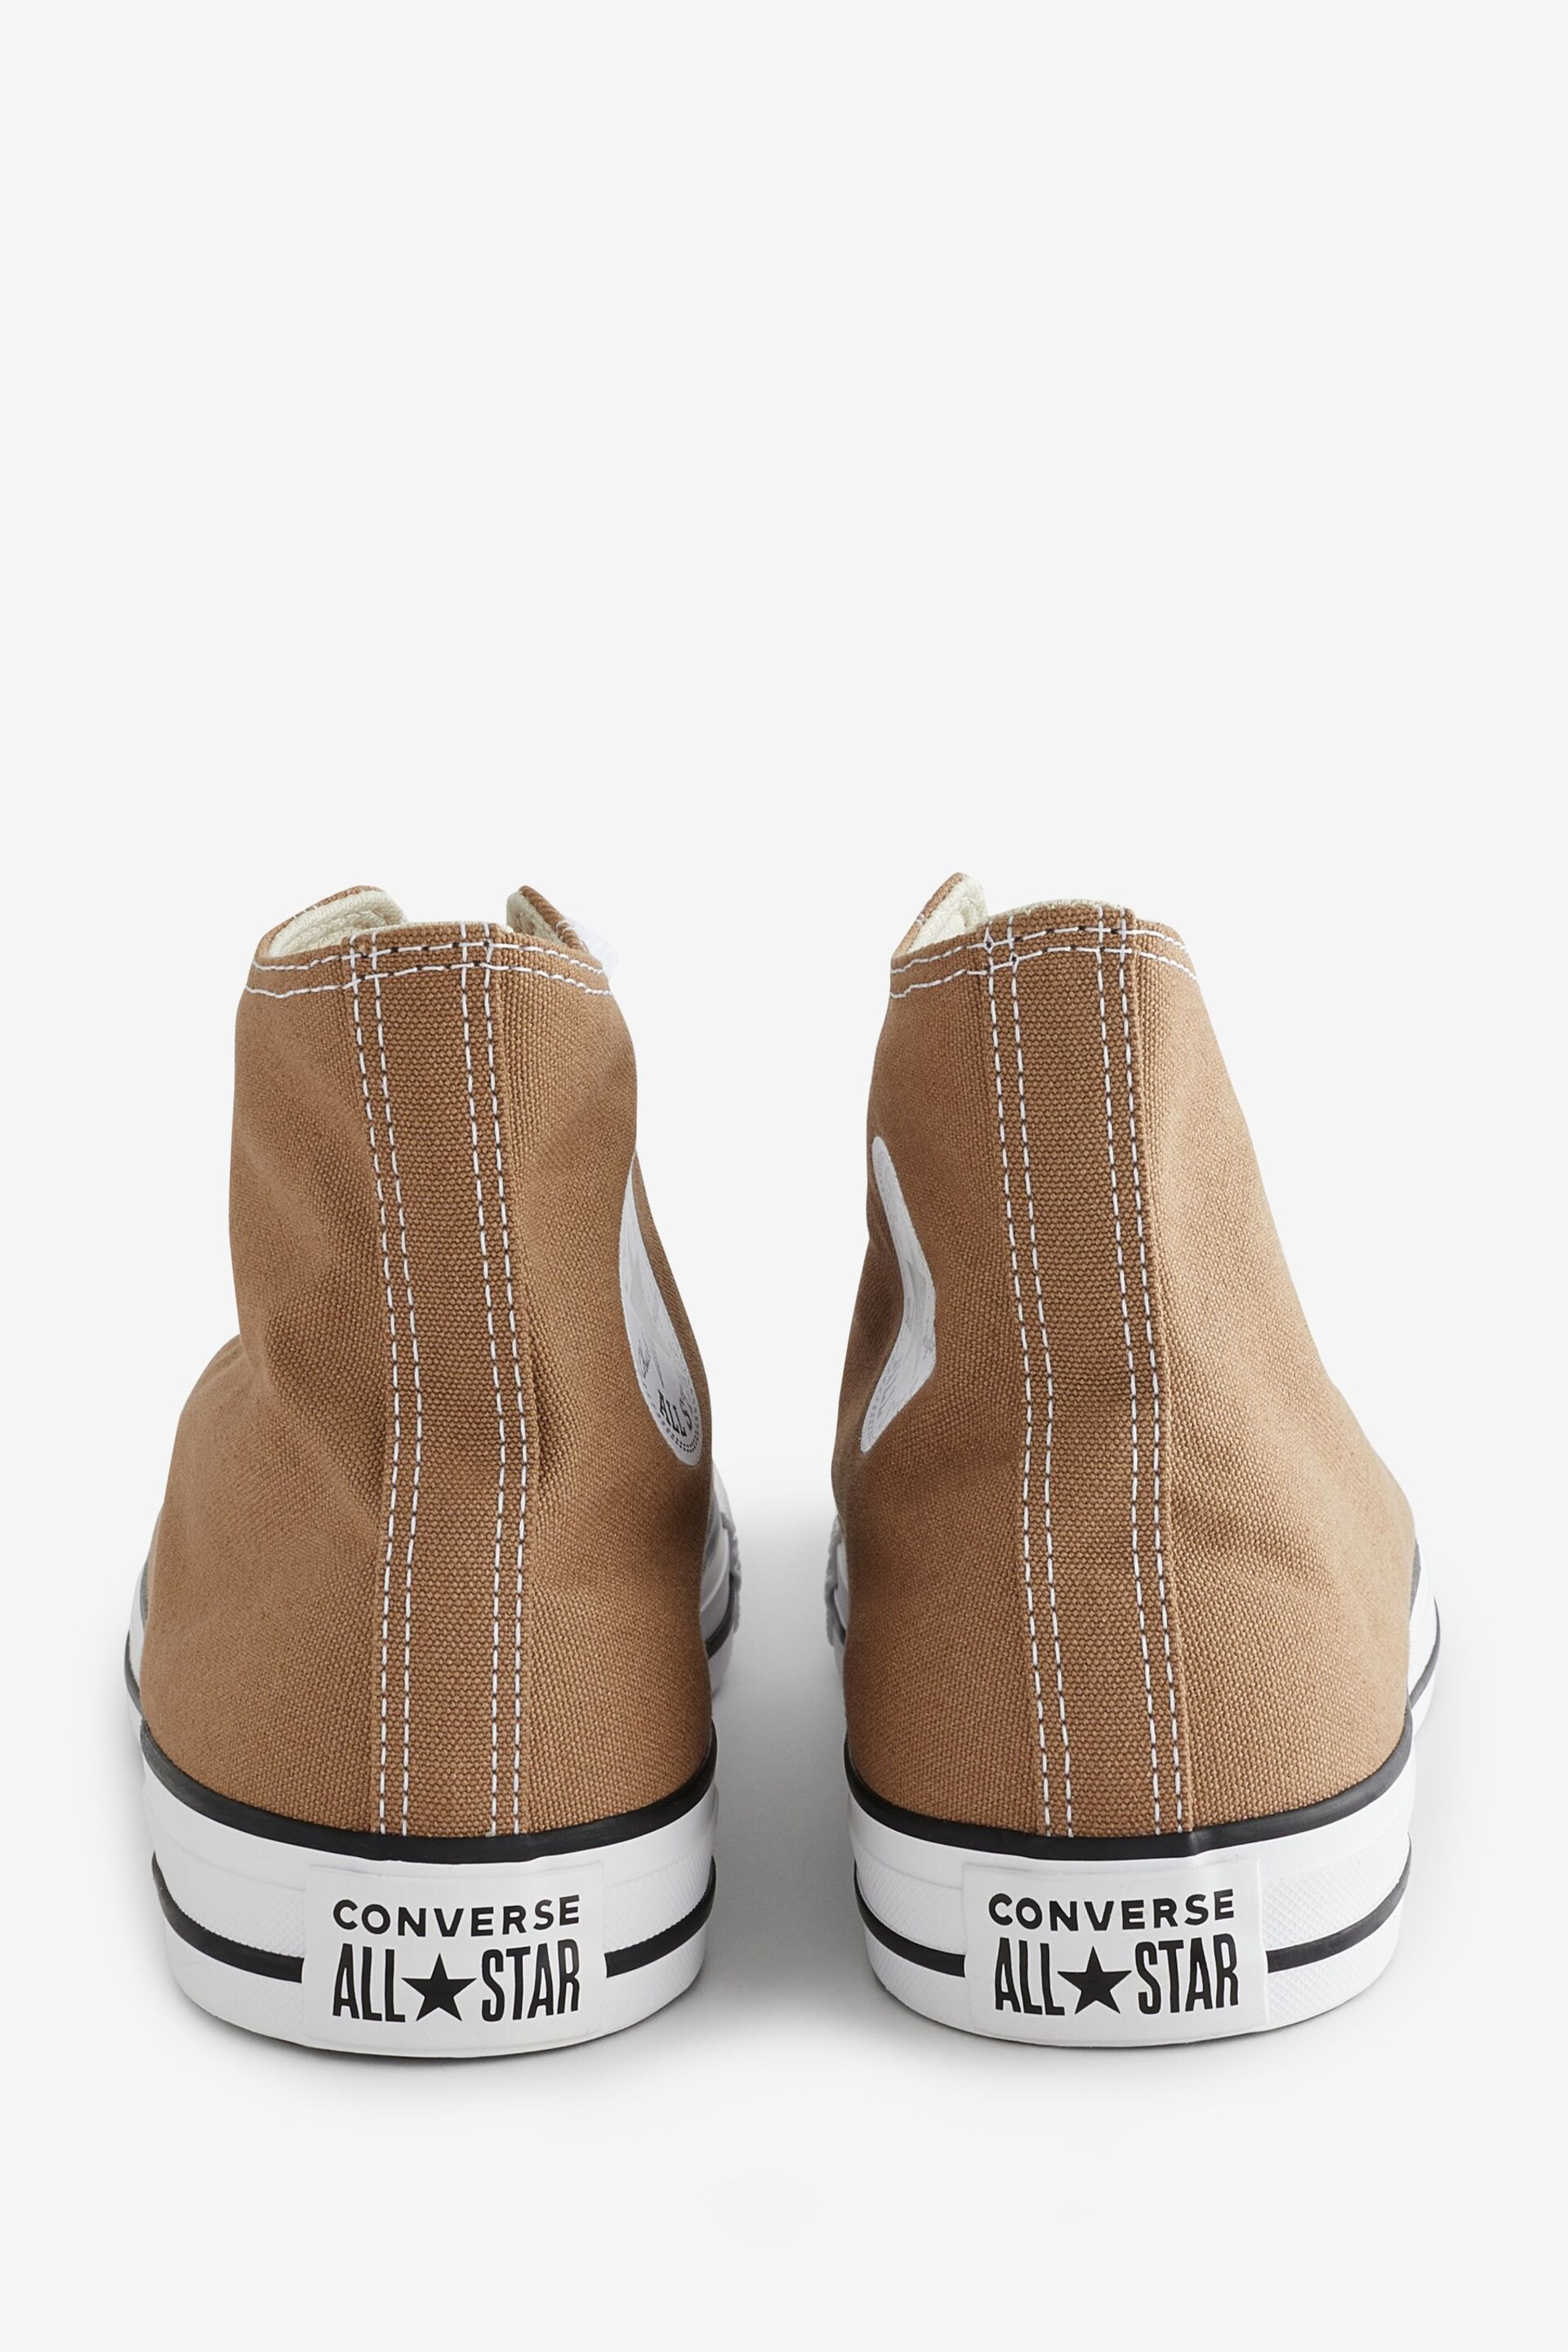 Converse Brown Chuck Taylor Classic High Top Trainers - Image 4 of 9